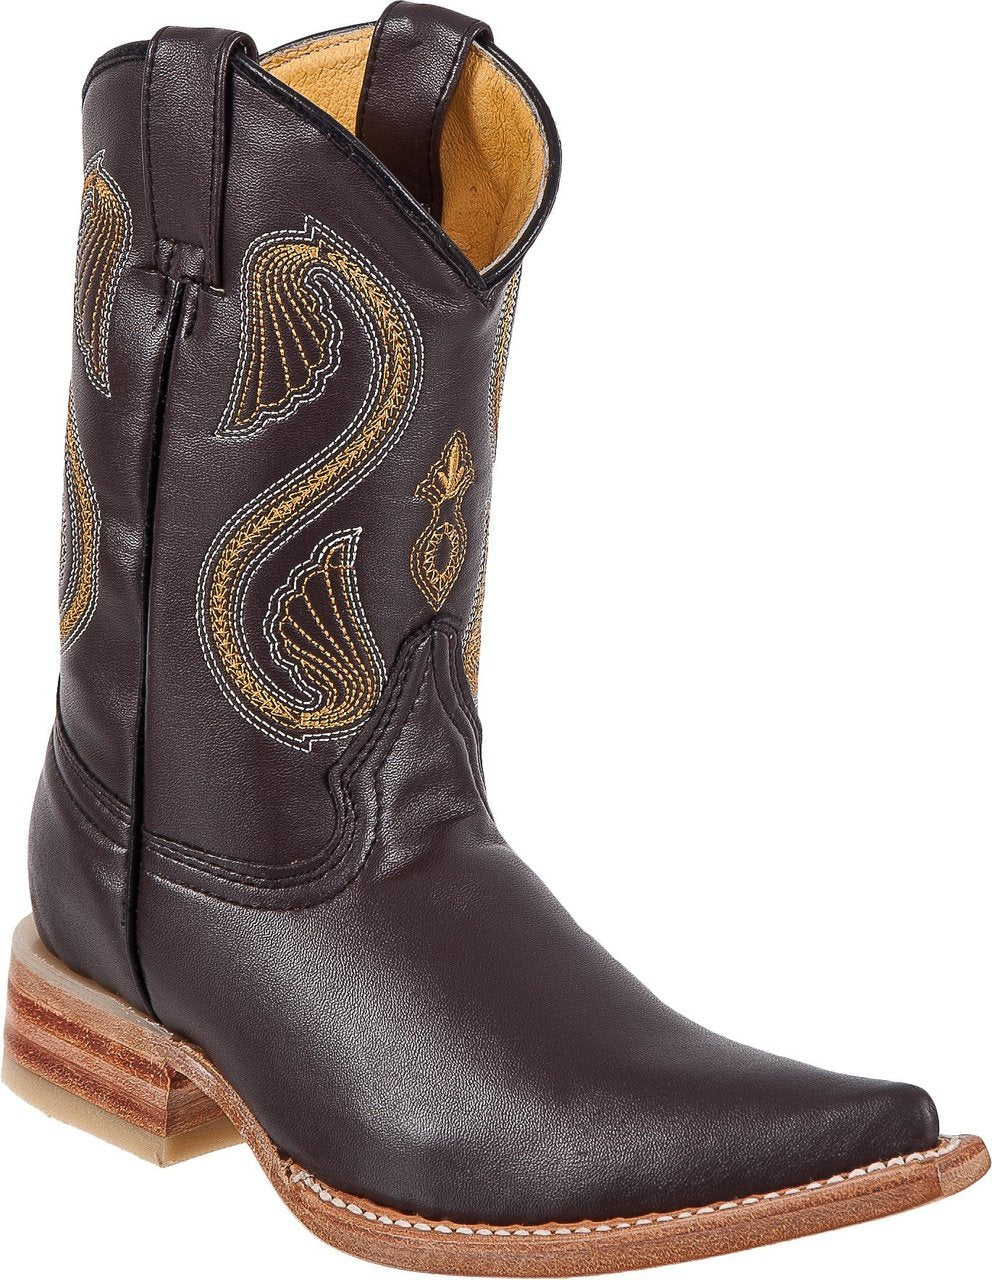 DIEGO'S Kids' Brown Goat Boots - Ch Toe